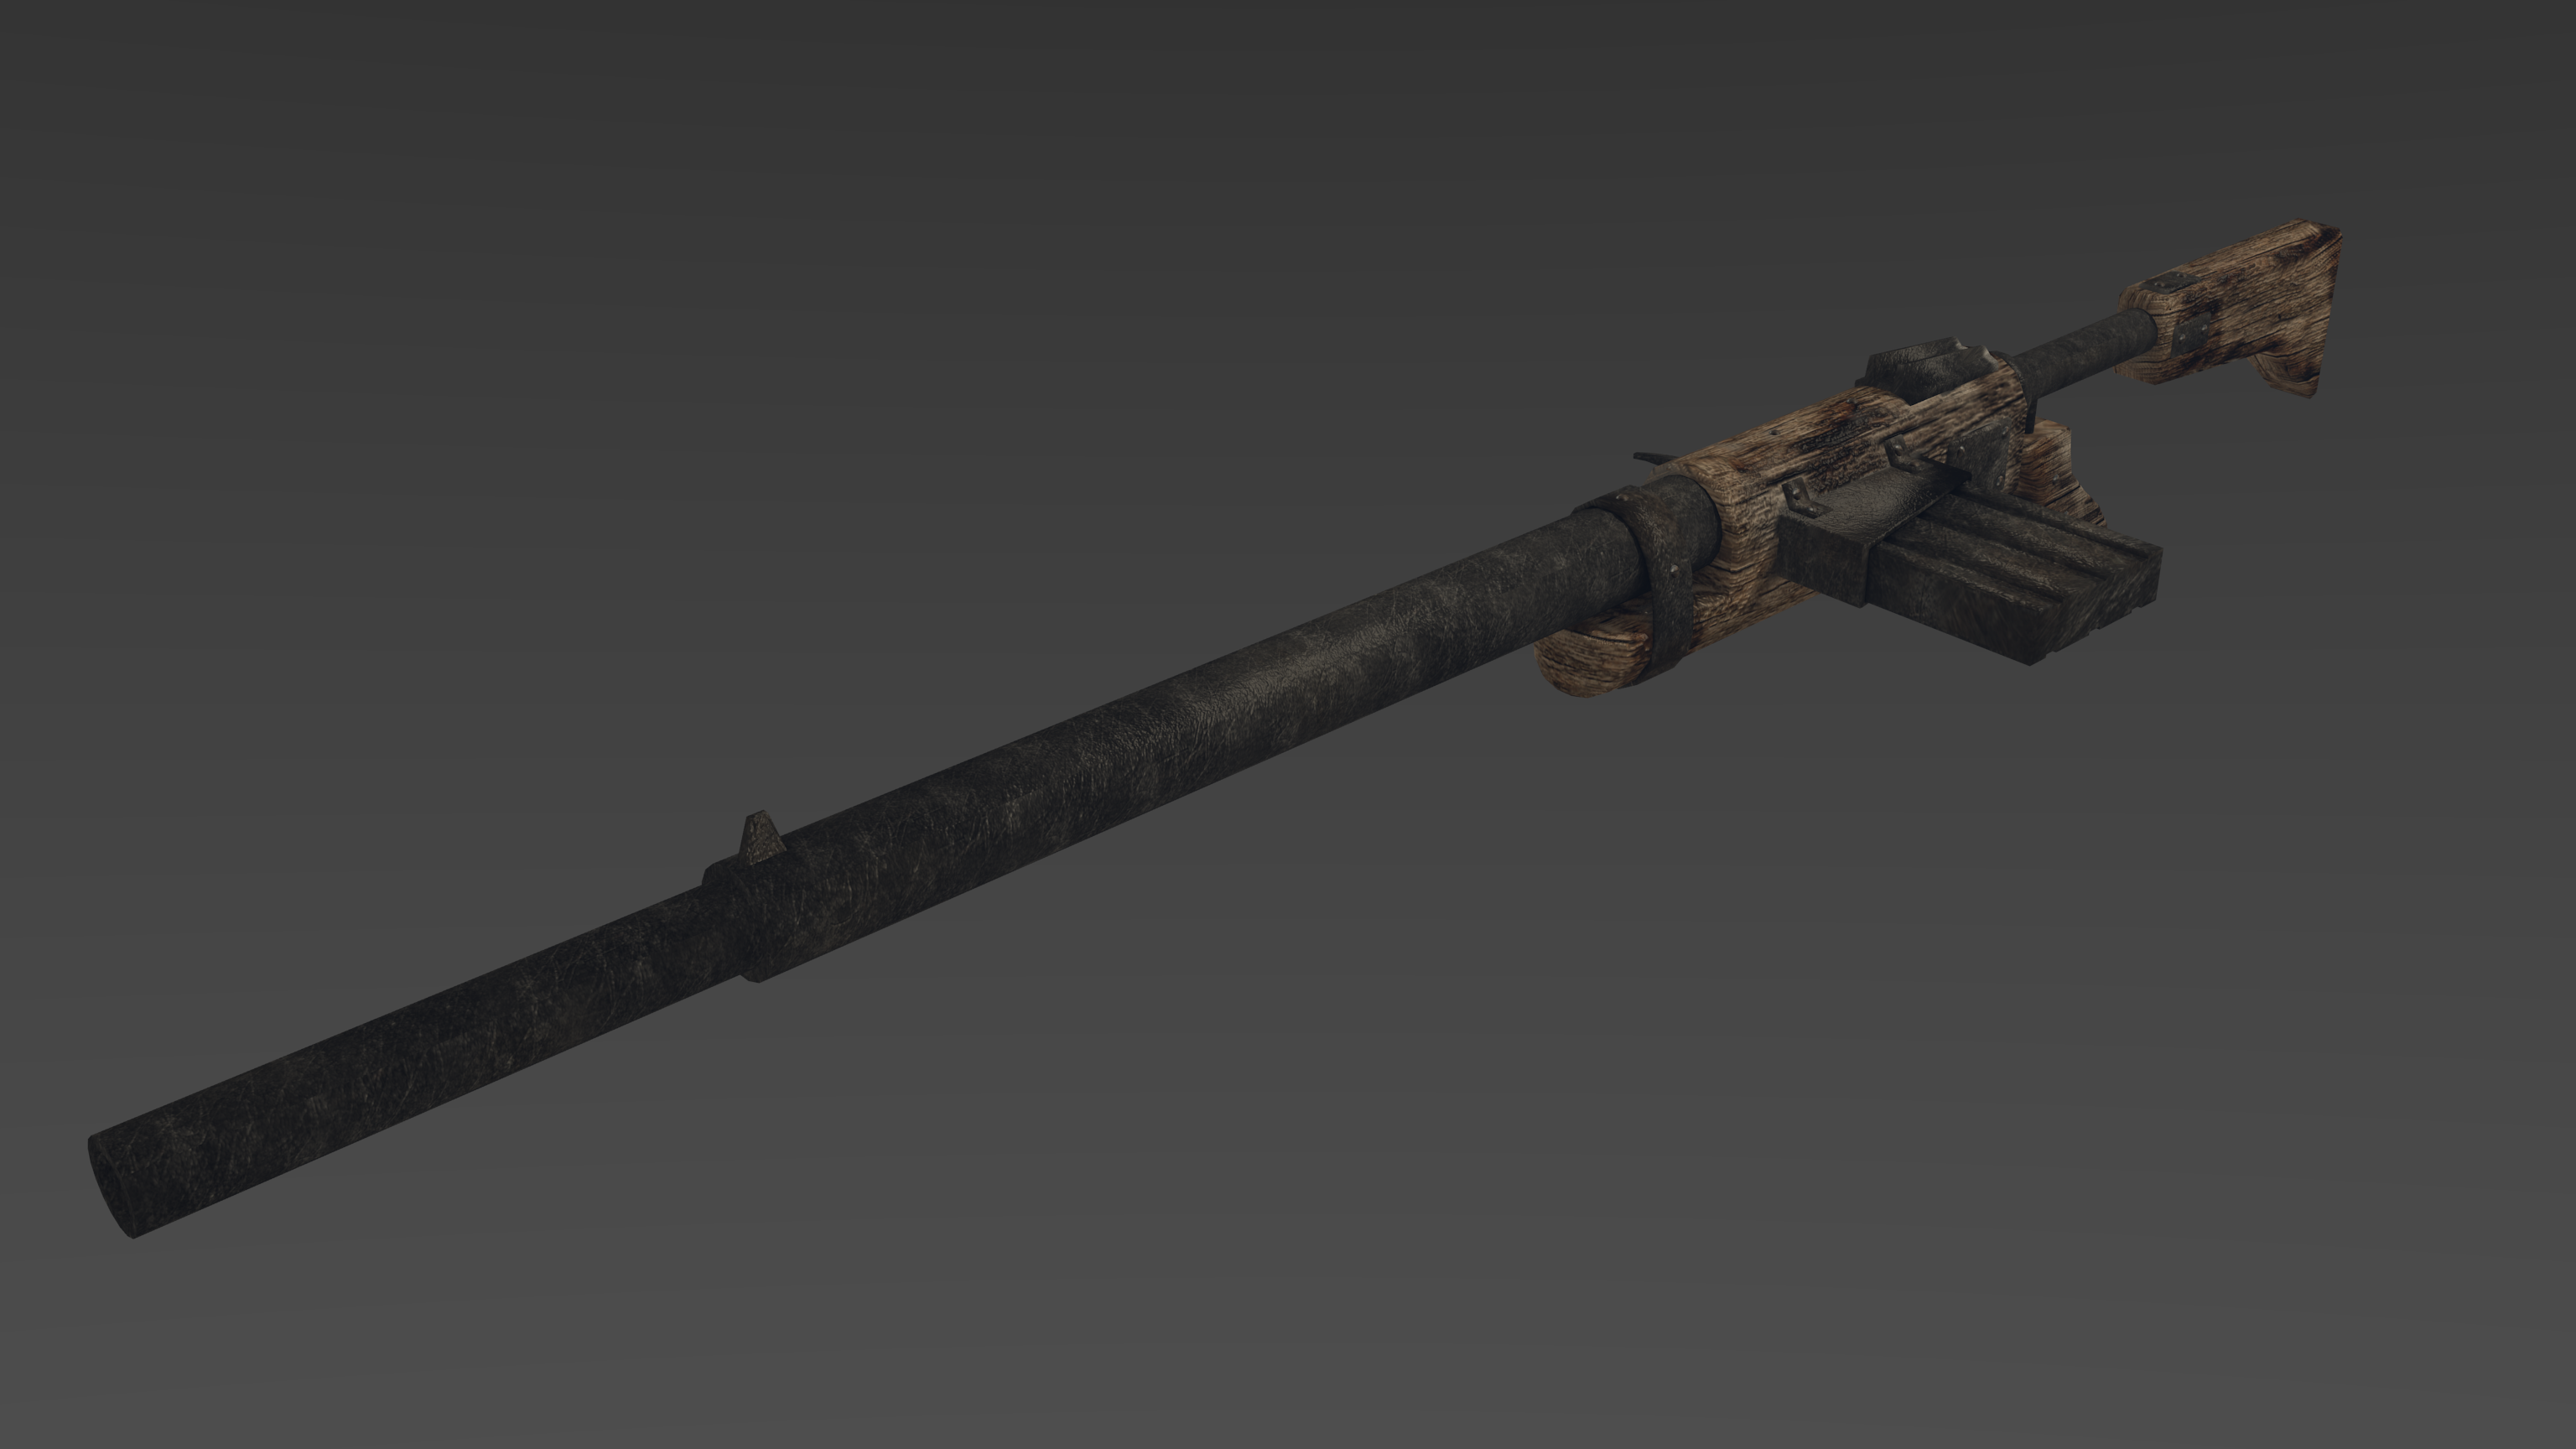 Post apocalyptic nerf sniper rifle by Fistgar on DeviantArt